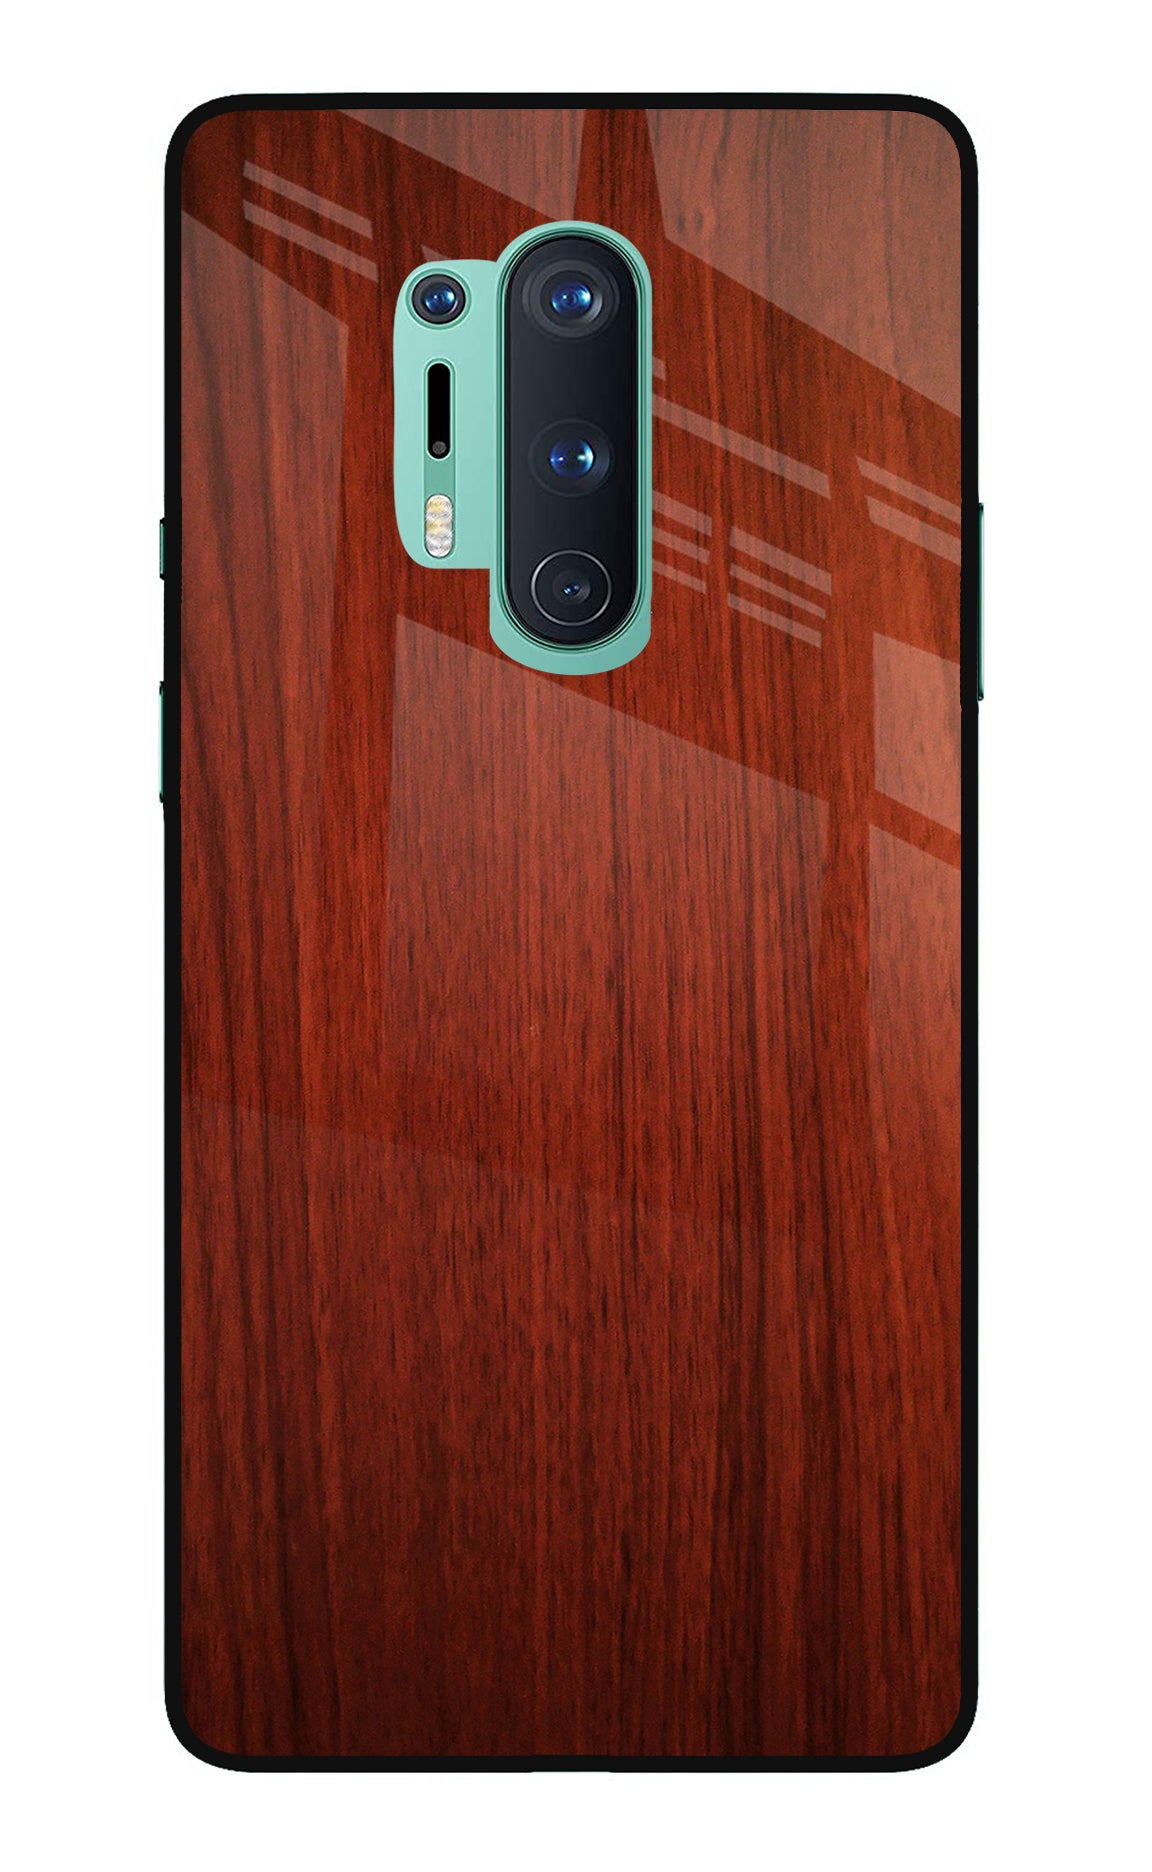 Wooden Plain Pattern Oneplus 8 Pro Back Cover